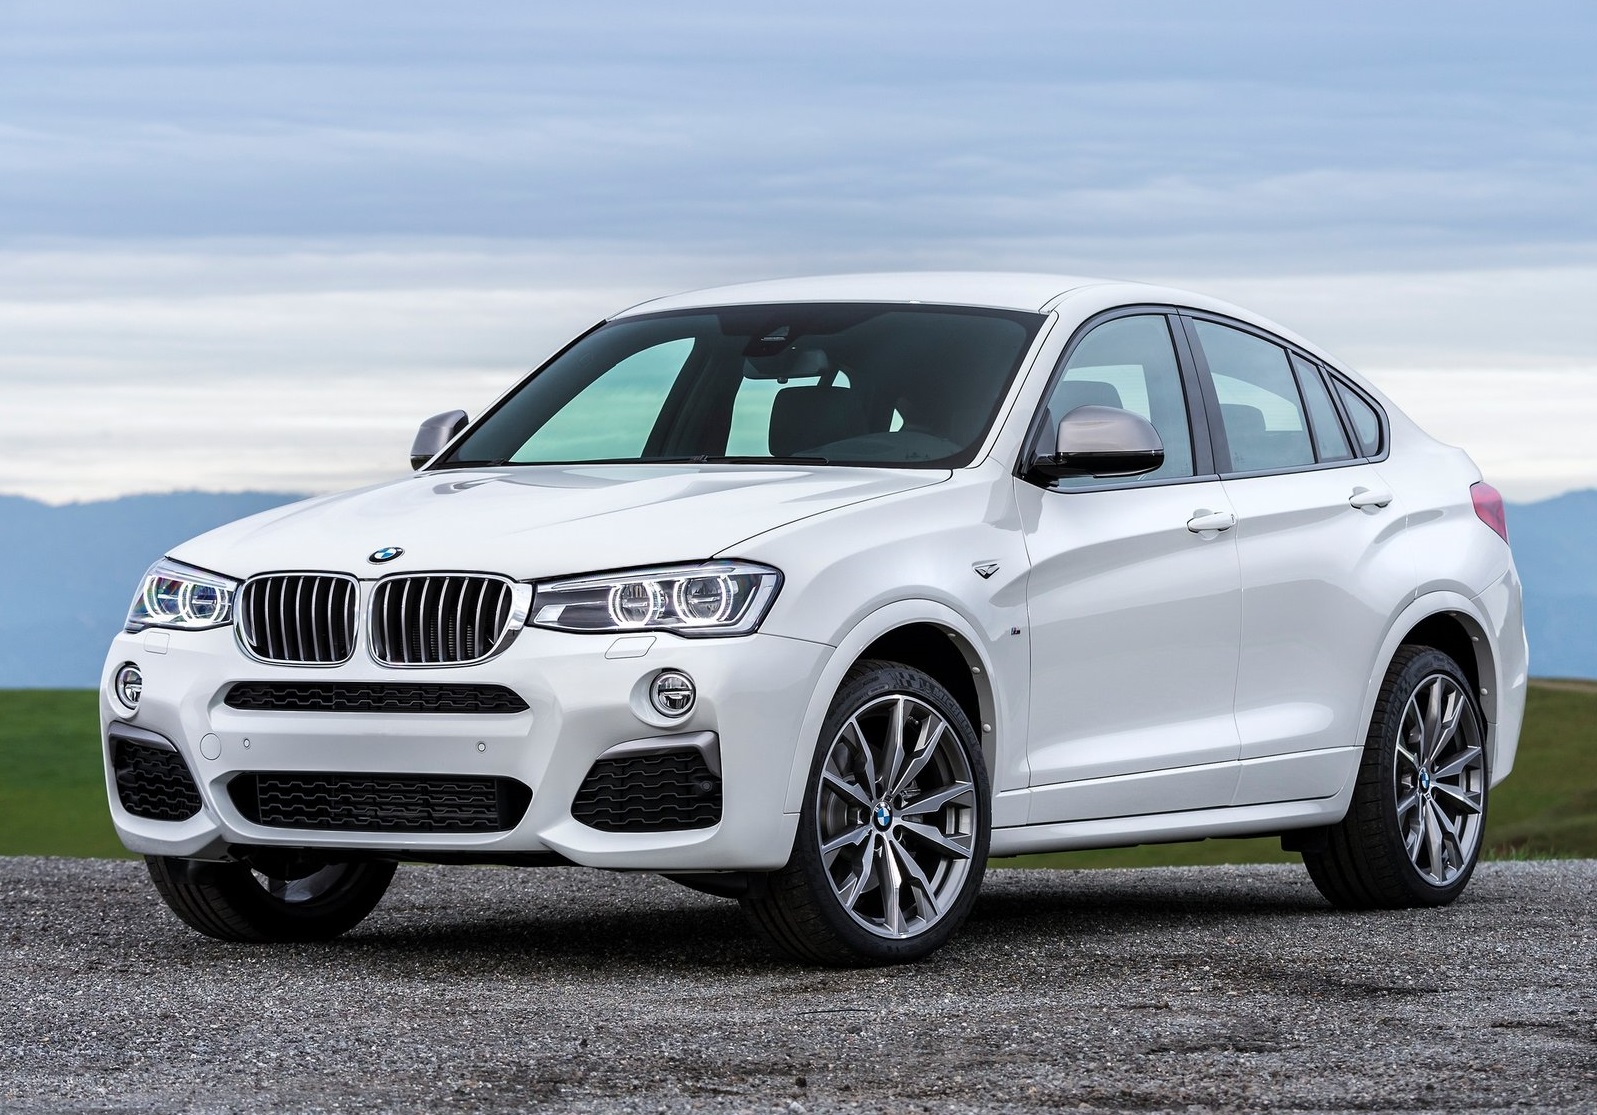 Video: BMW X4 M40i Drag Races BMW X5 M with Predictable Results